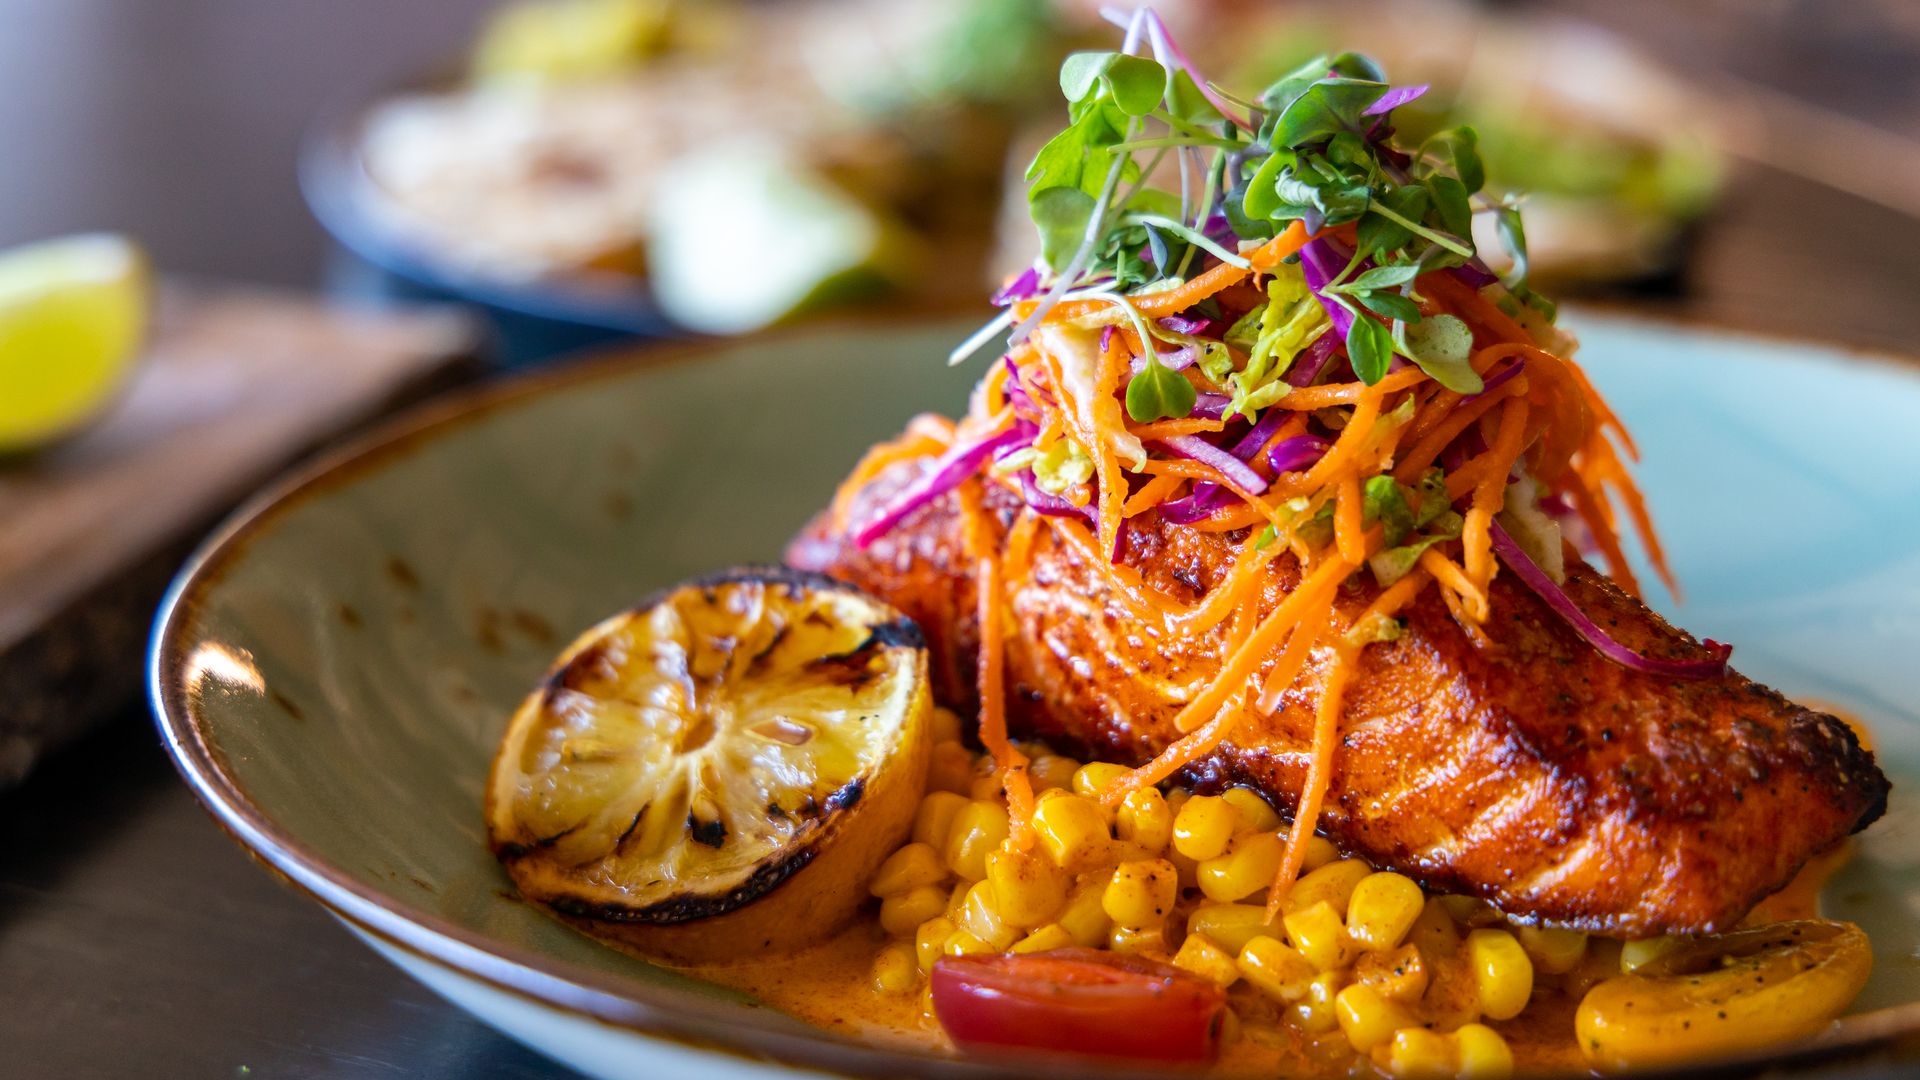 A dinner plate with grilled salmon topped with a fresh salad with a bed of corn and tomatoes underneath.